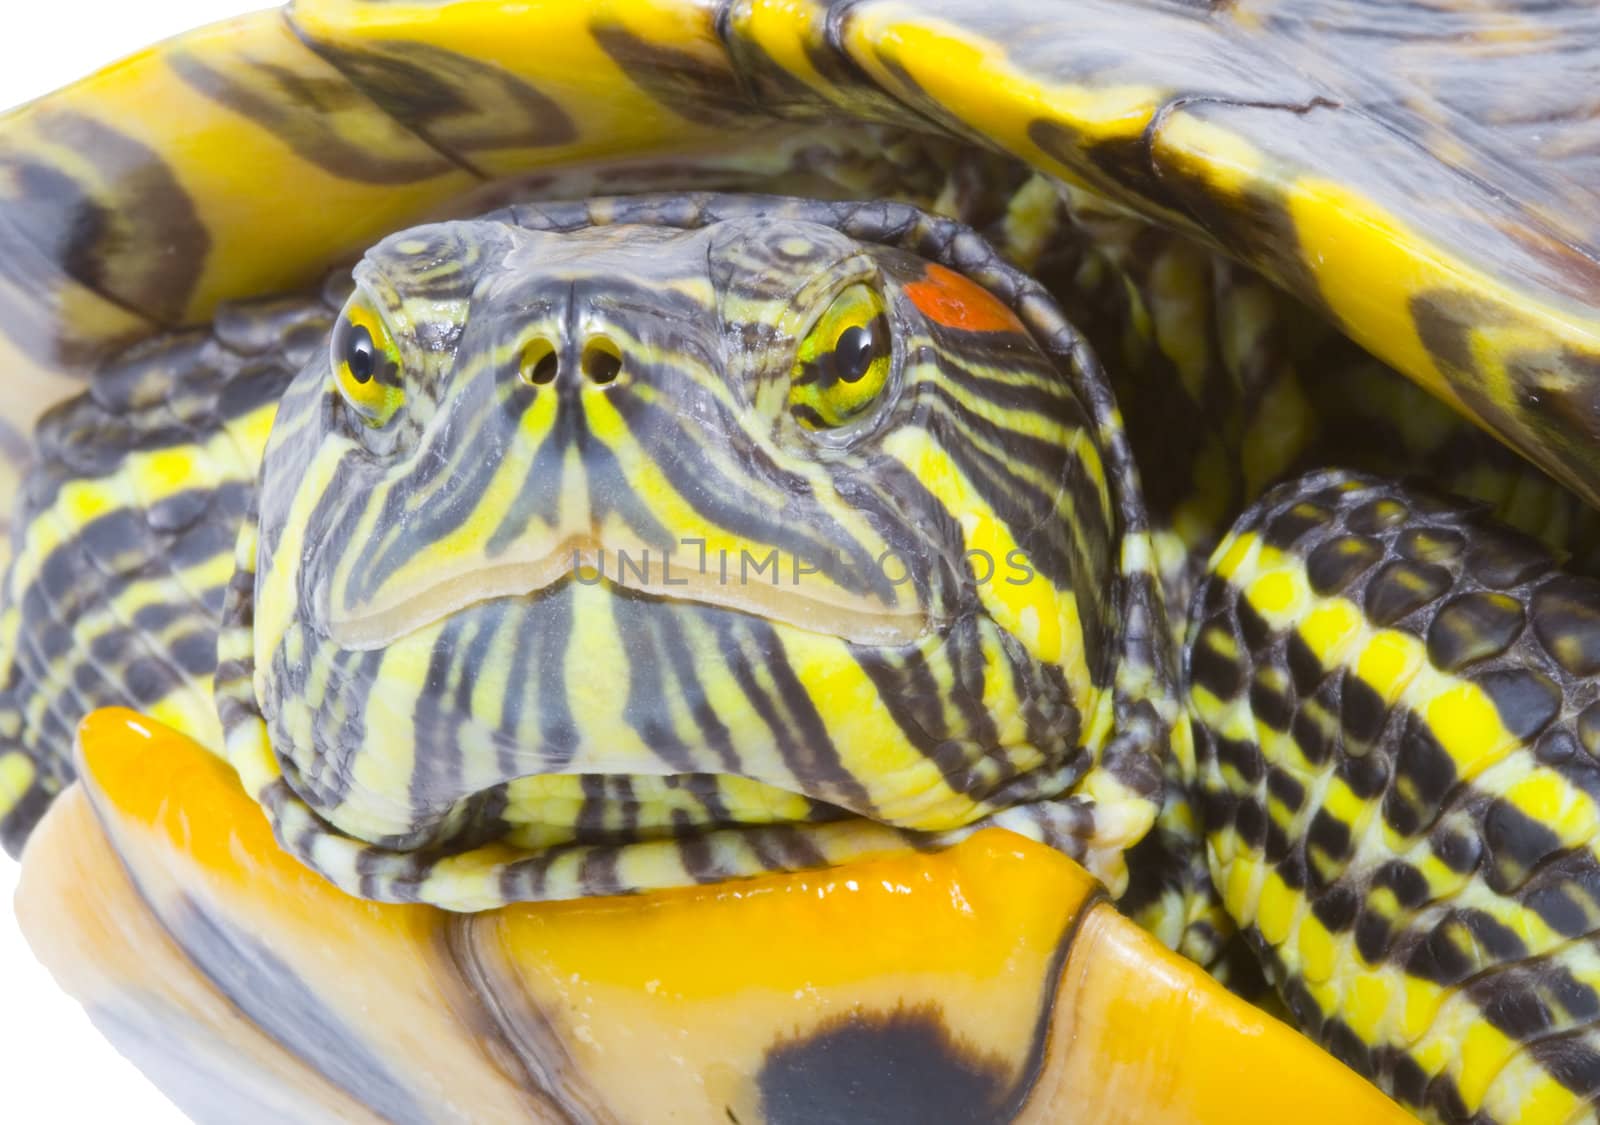 head and face of a turtle - Pseudemys scripta elegans - close up